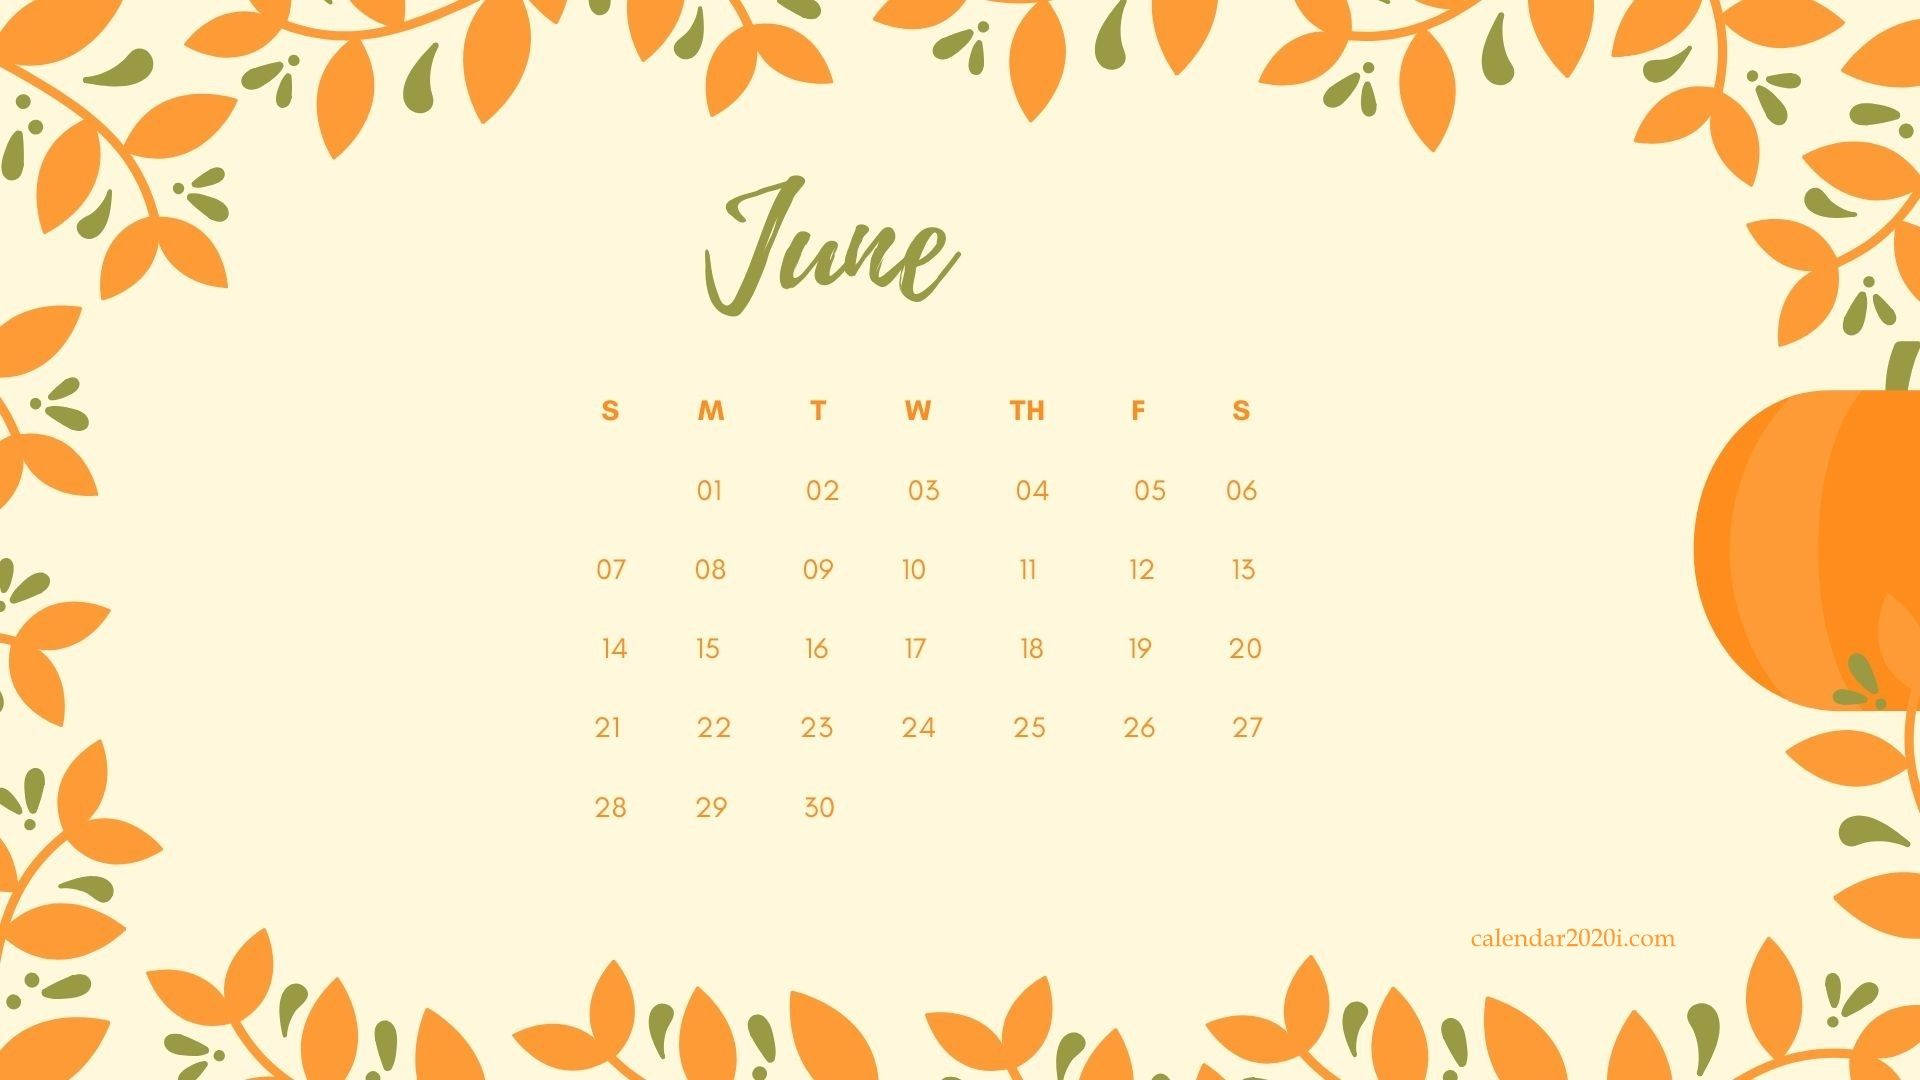 Get Organized For June With This Stylish Calendar! Background